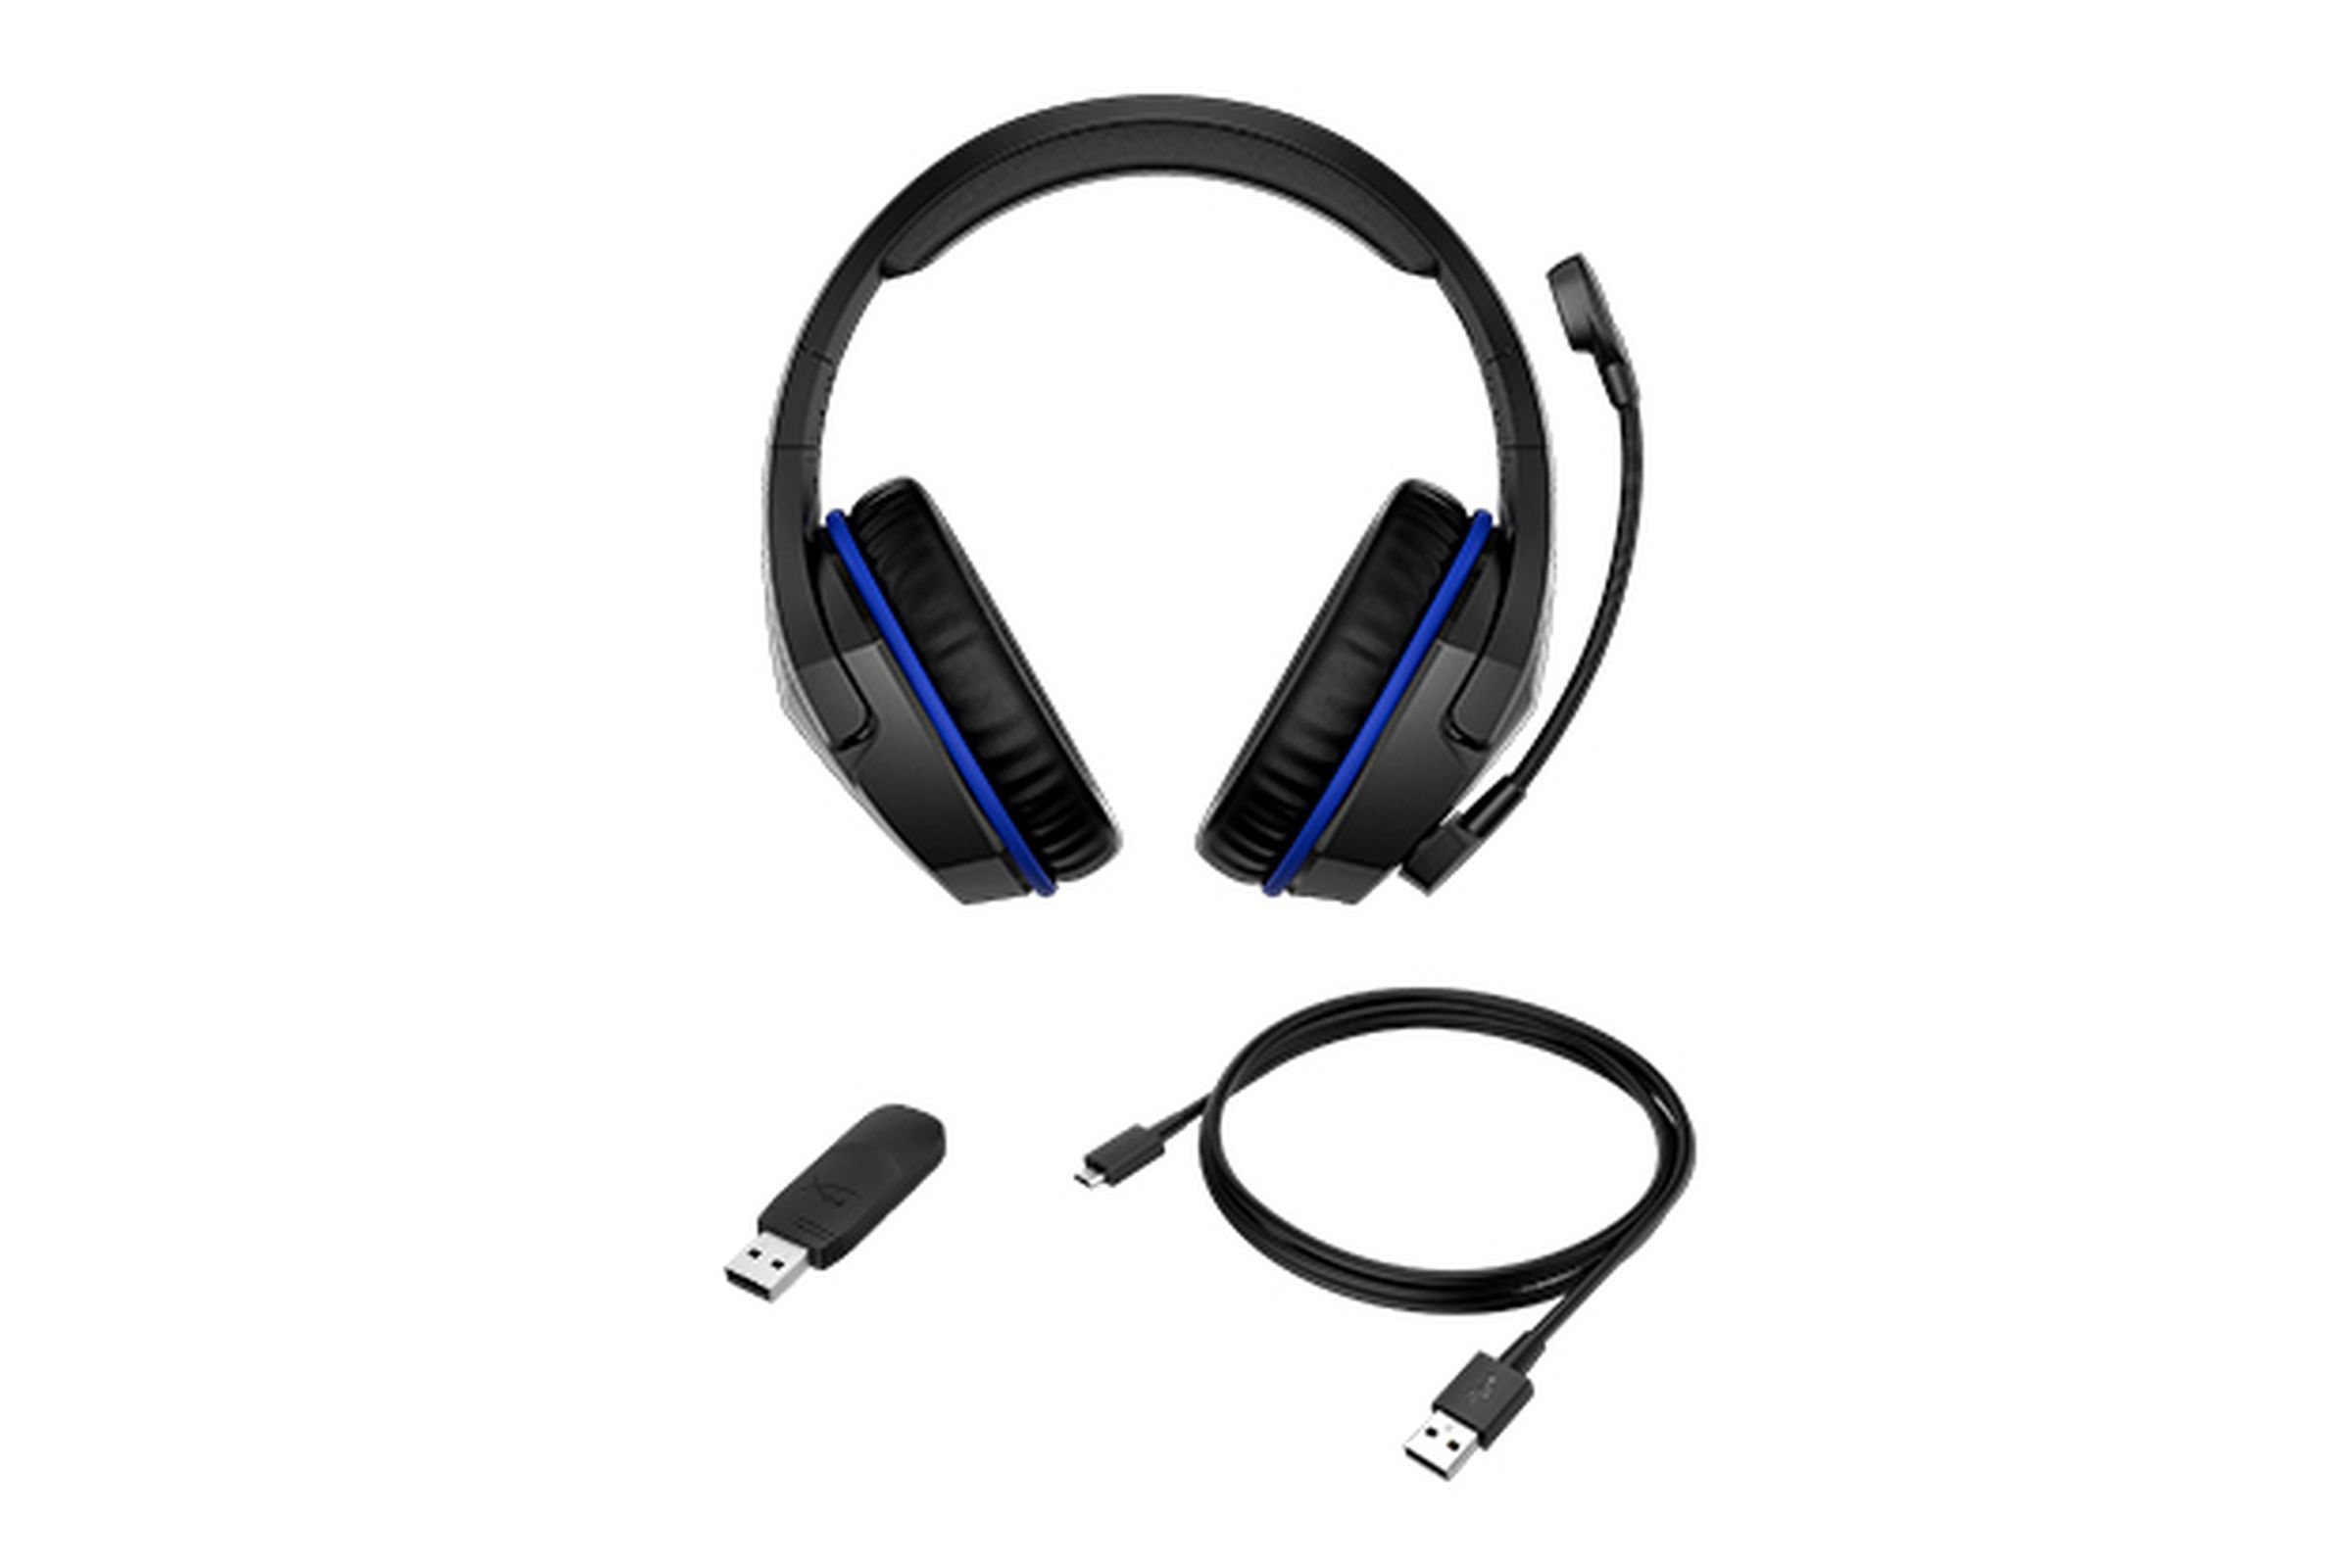 The Cloud Stinger Wireless includes a USB receiver, which you’ll need to plug into your PS4 or PC.